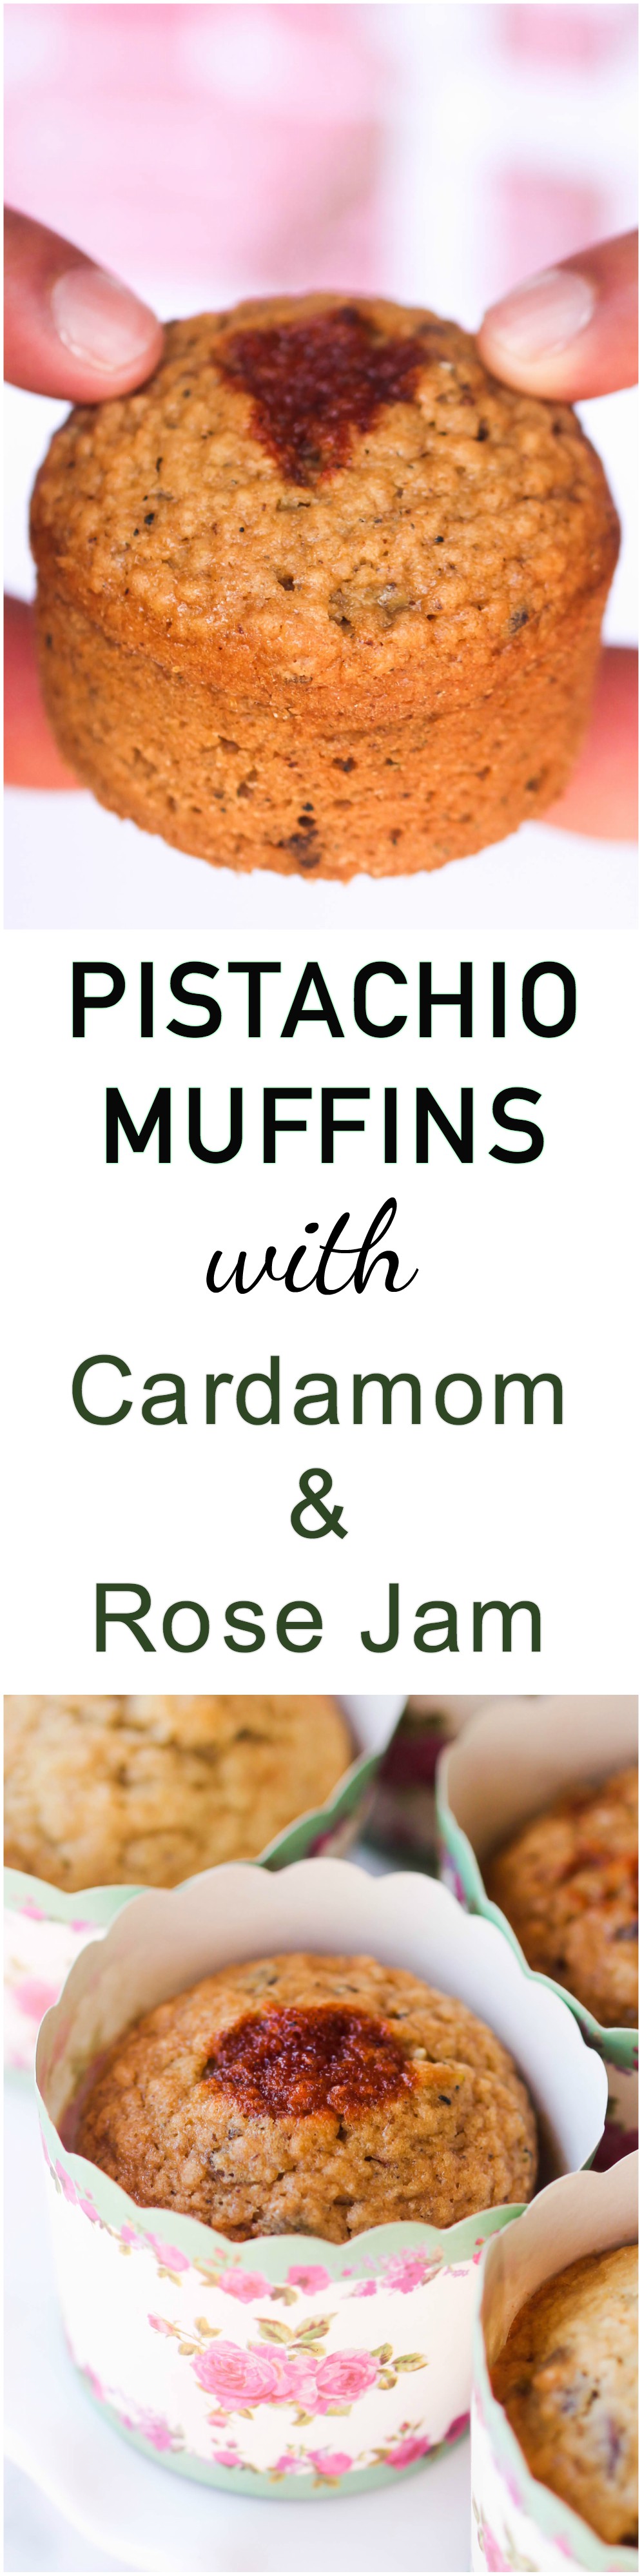 Pistachio Muffins with Cardamom and Rose Jam are perfect for grab n' go breakfast or afternoon snack with your tea or coffee.